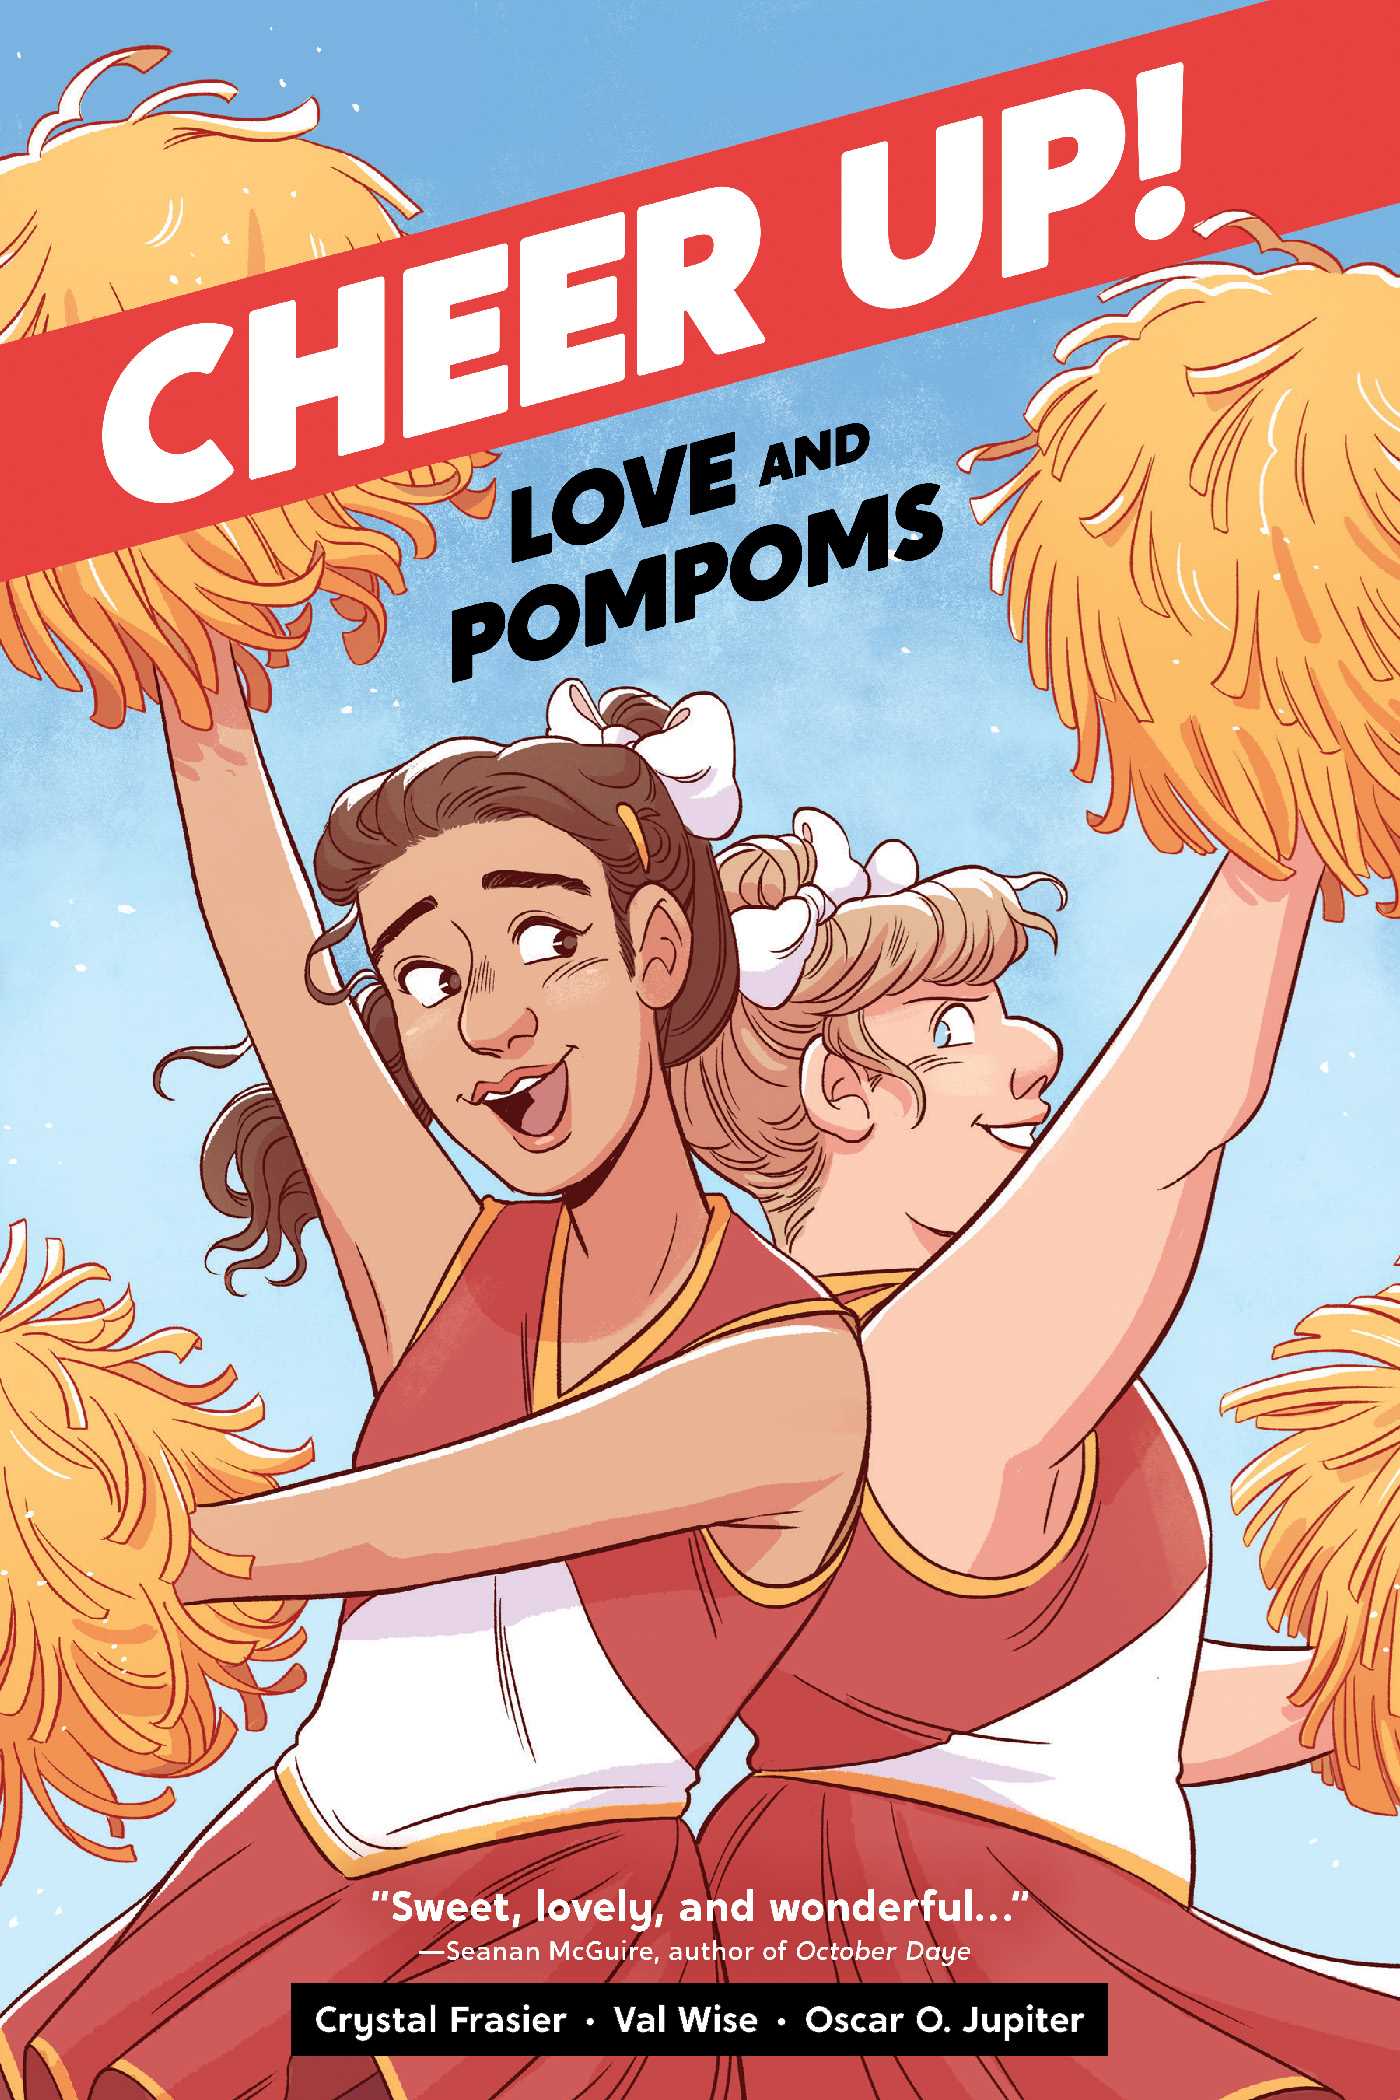 Cover image for "Cheer Up! Love and pompoms!"